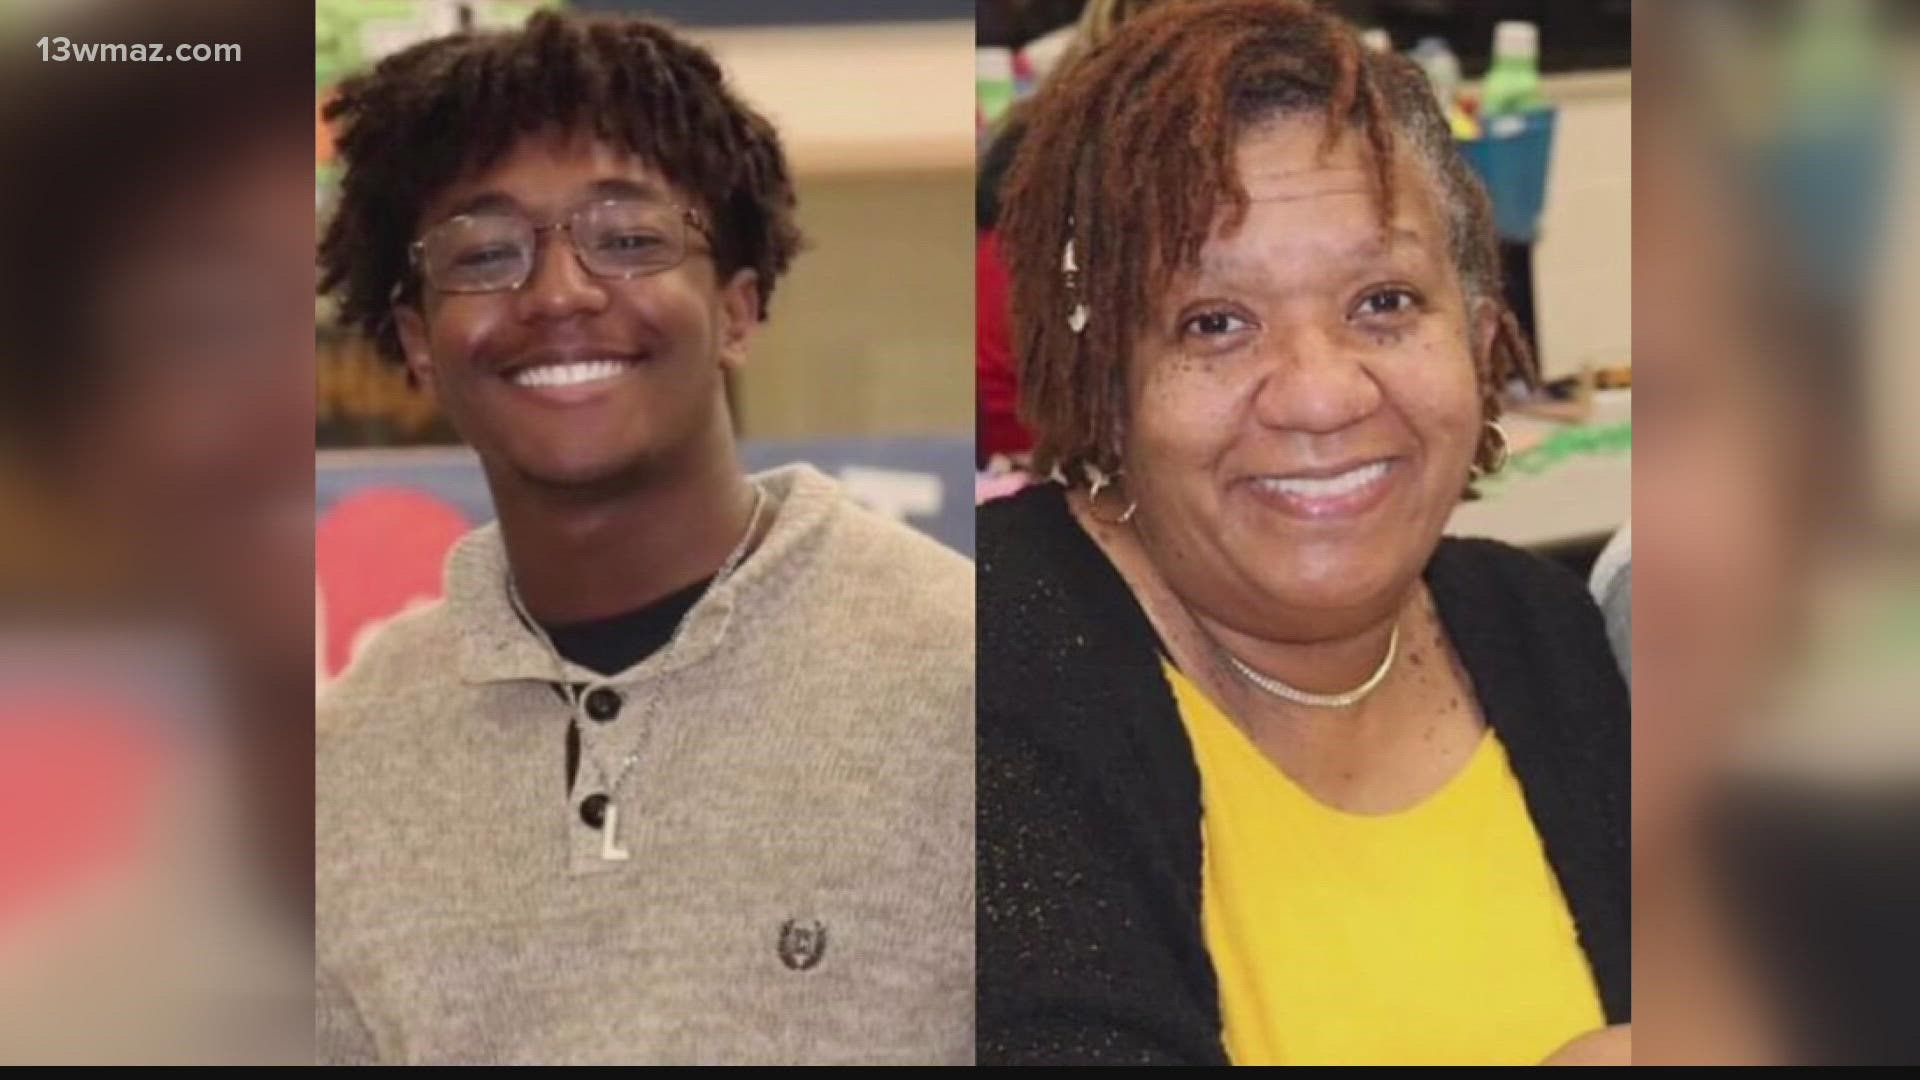 The teen involved is making a full recovery, and the mom of one of his friends decided to start several fundraisers for him.